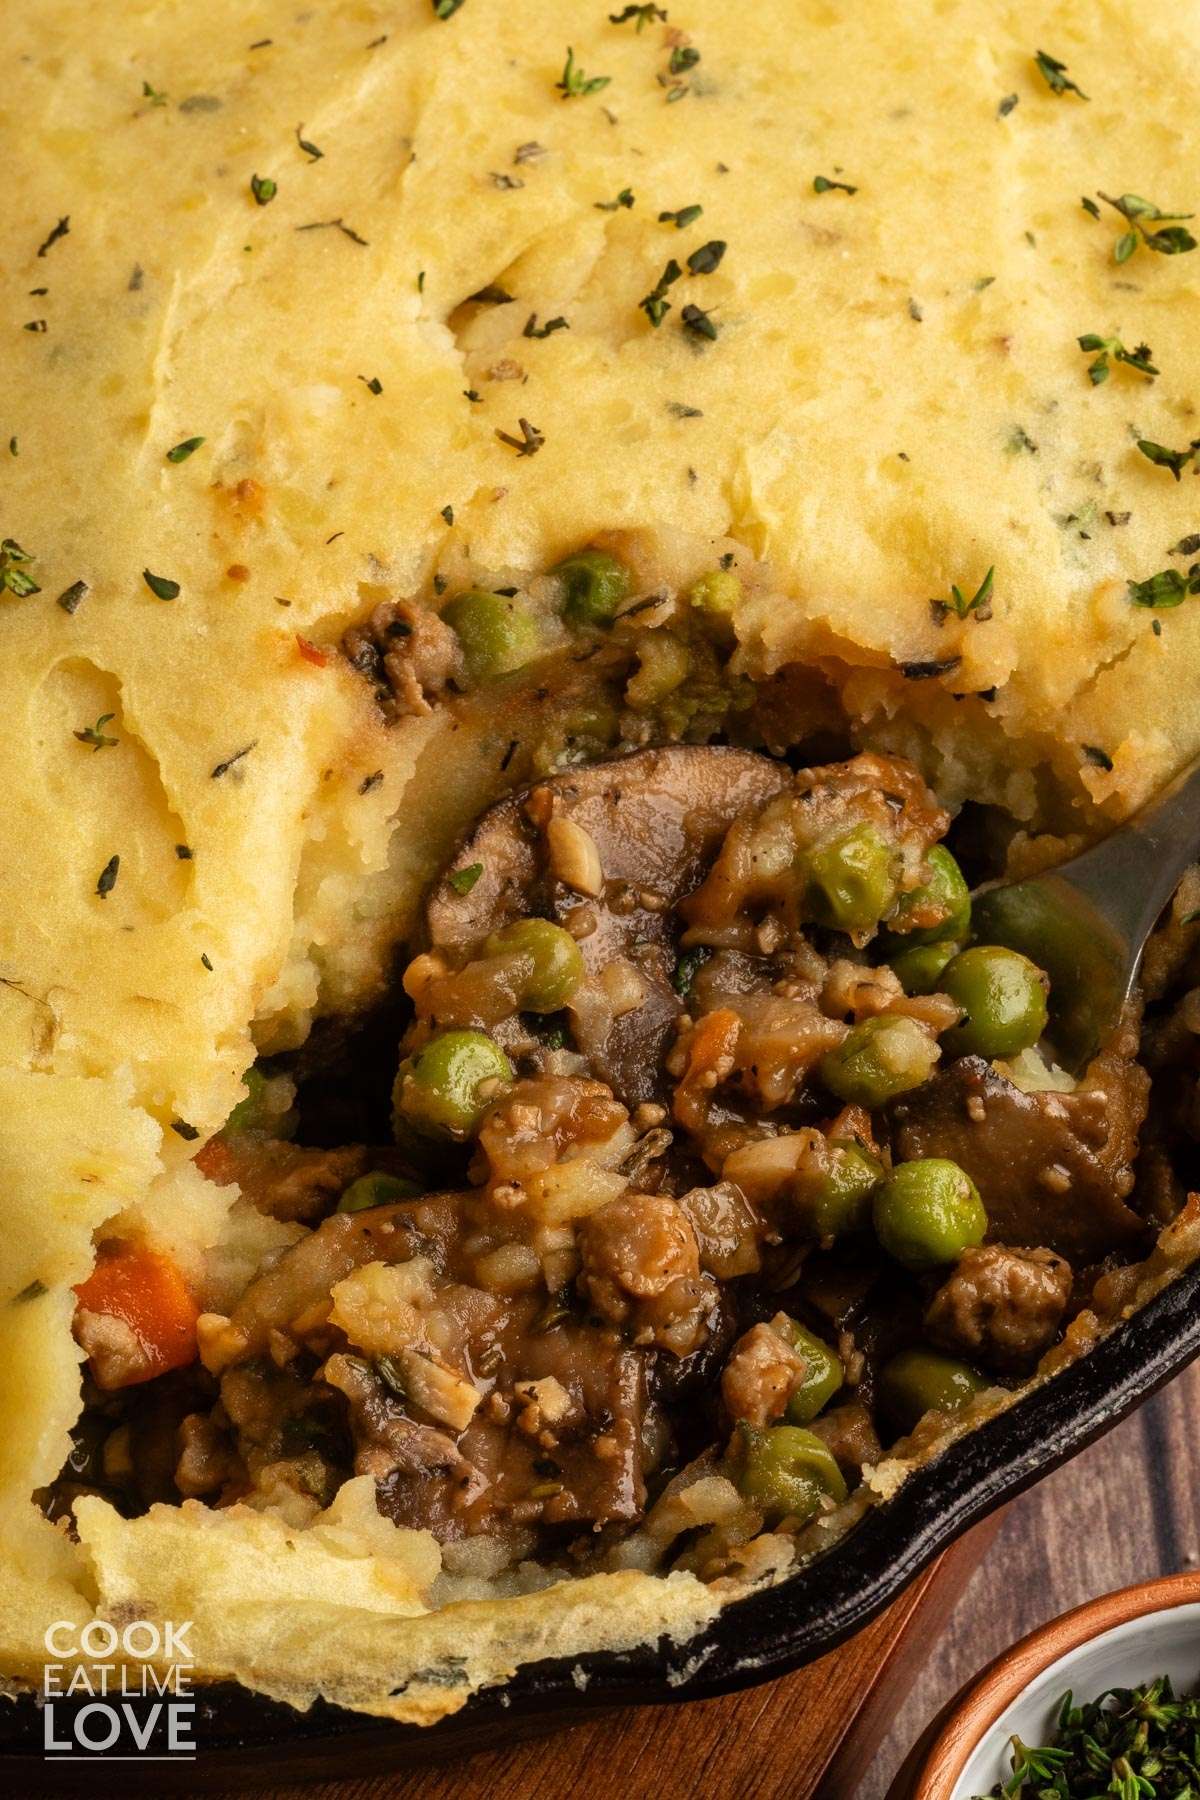 A close up of beyond meat shepherd's pie on the table with a portion missing and you can see the inside mixture topped with mashed potatoes.